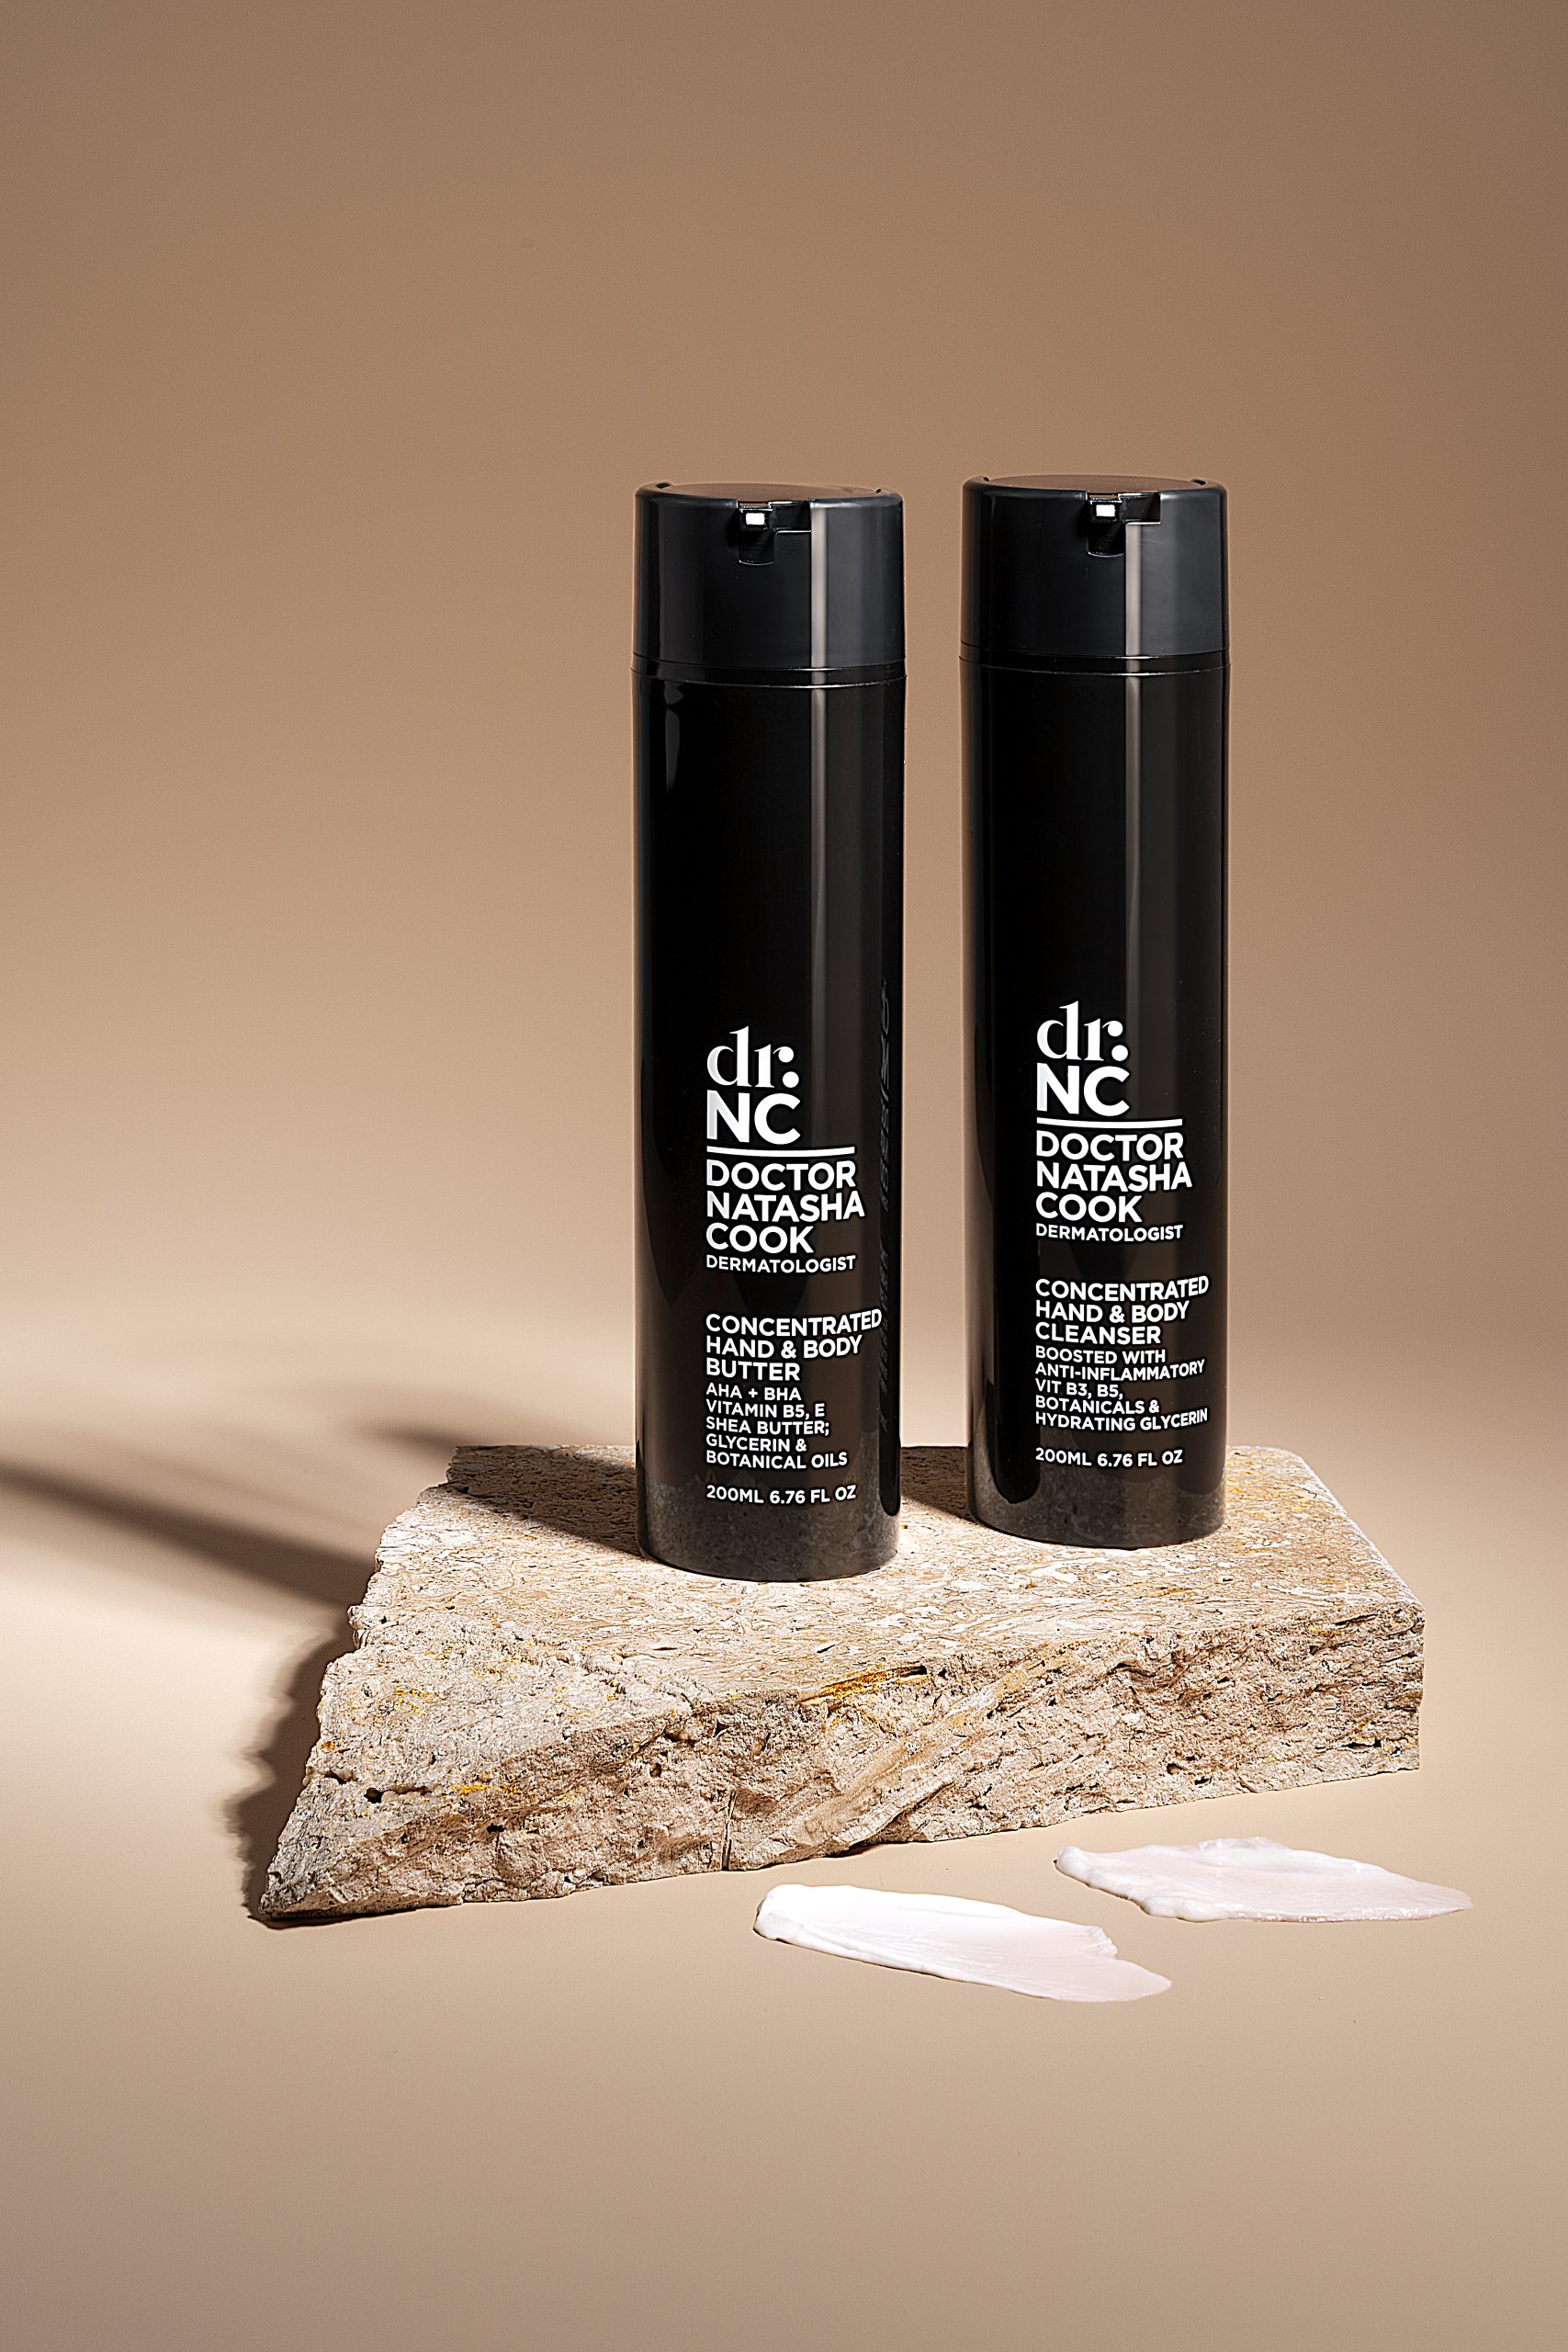 Product photography for skin care brand dr.NC